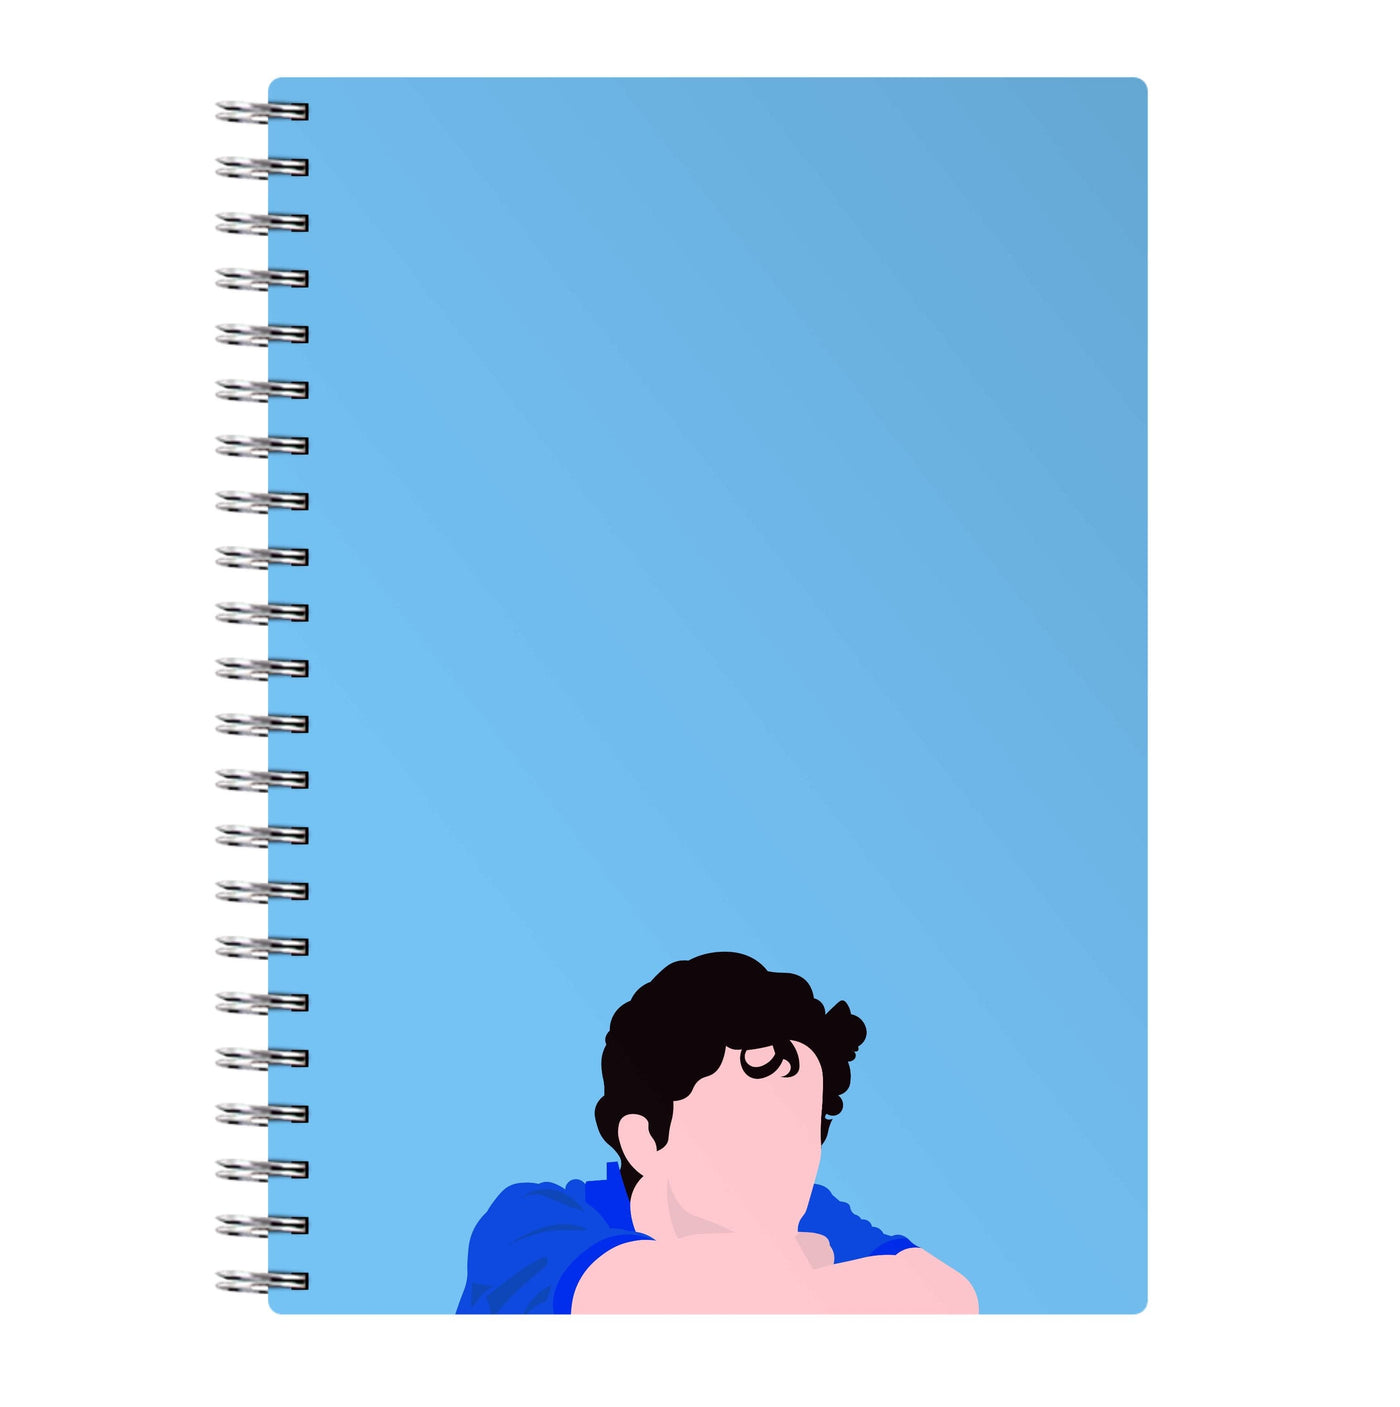 Call Me By Your Name - Timothée Chalamet Notebook